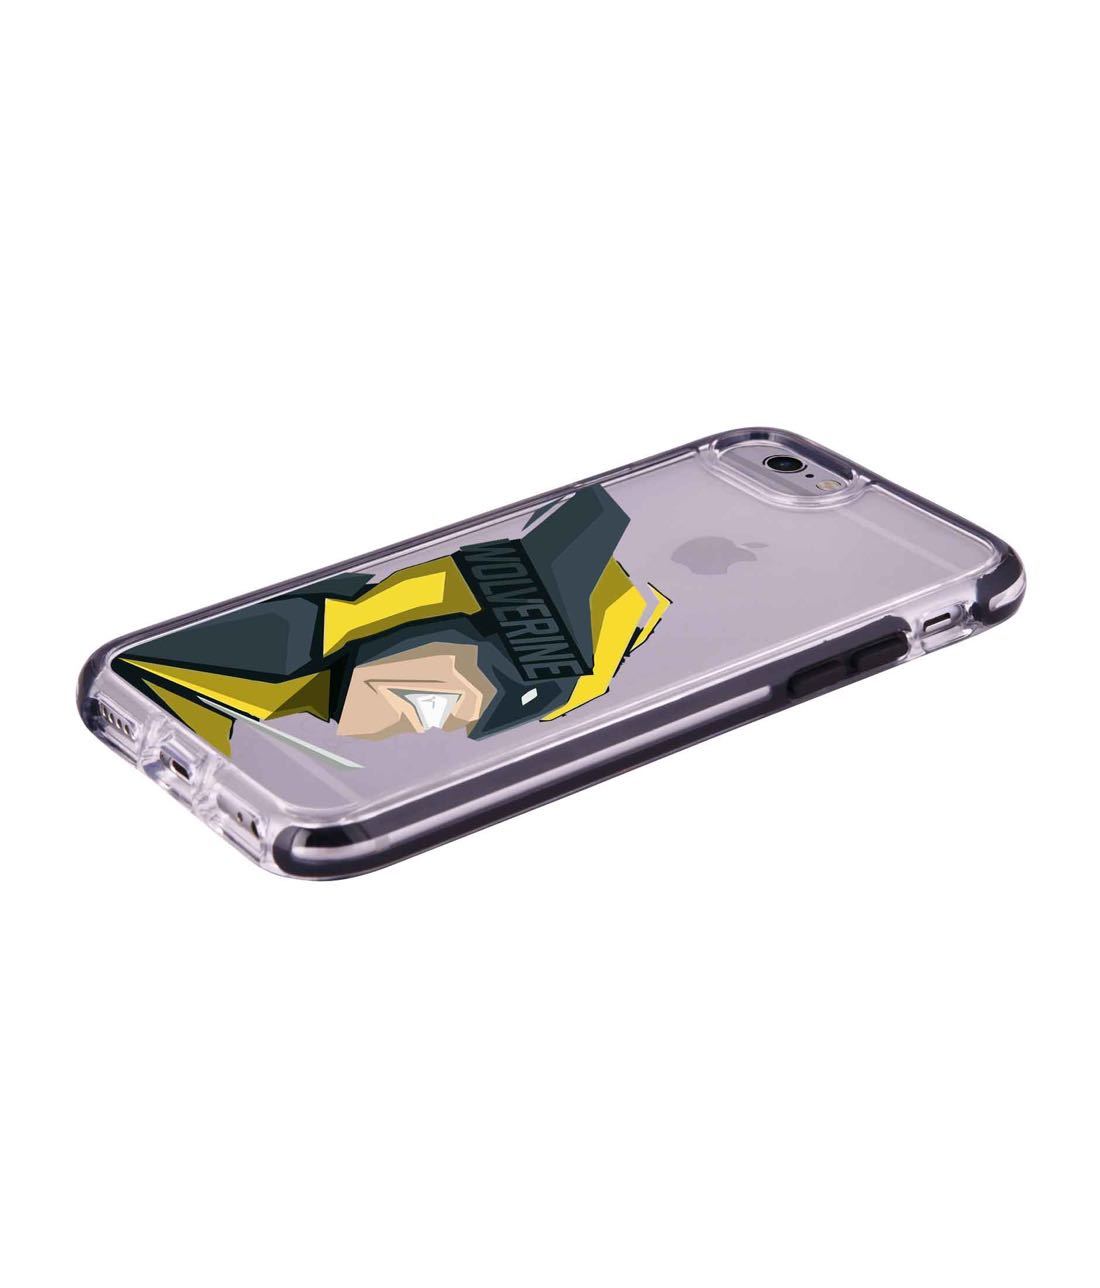 Dont Mess with Wolverine - Extreme Phone Case for iPhone 6S Plus